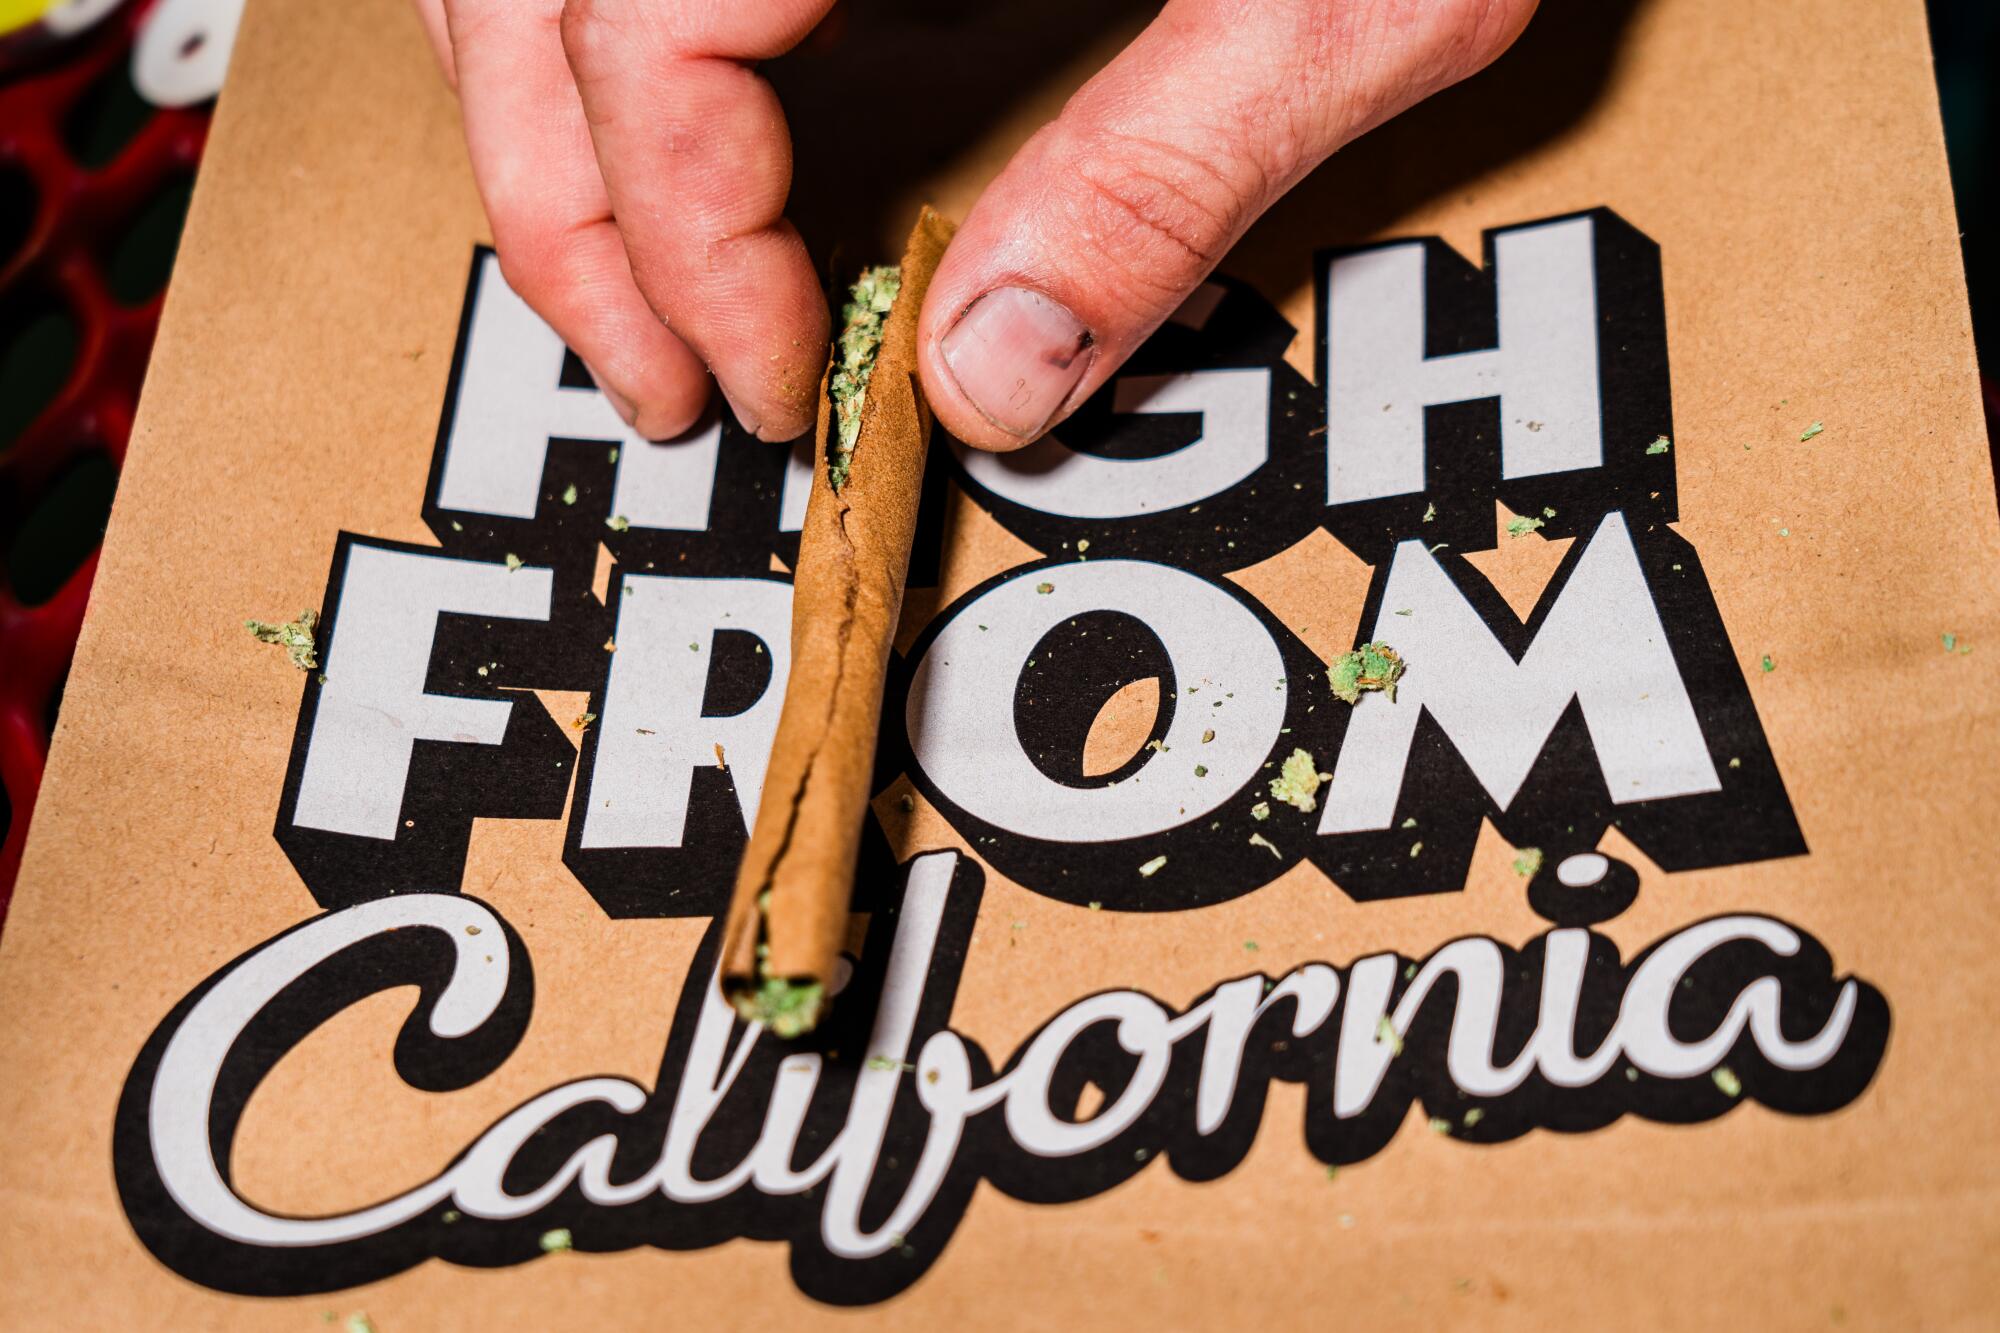 A cannabis joint in front of a bag that reads "High from California"